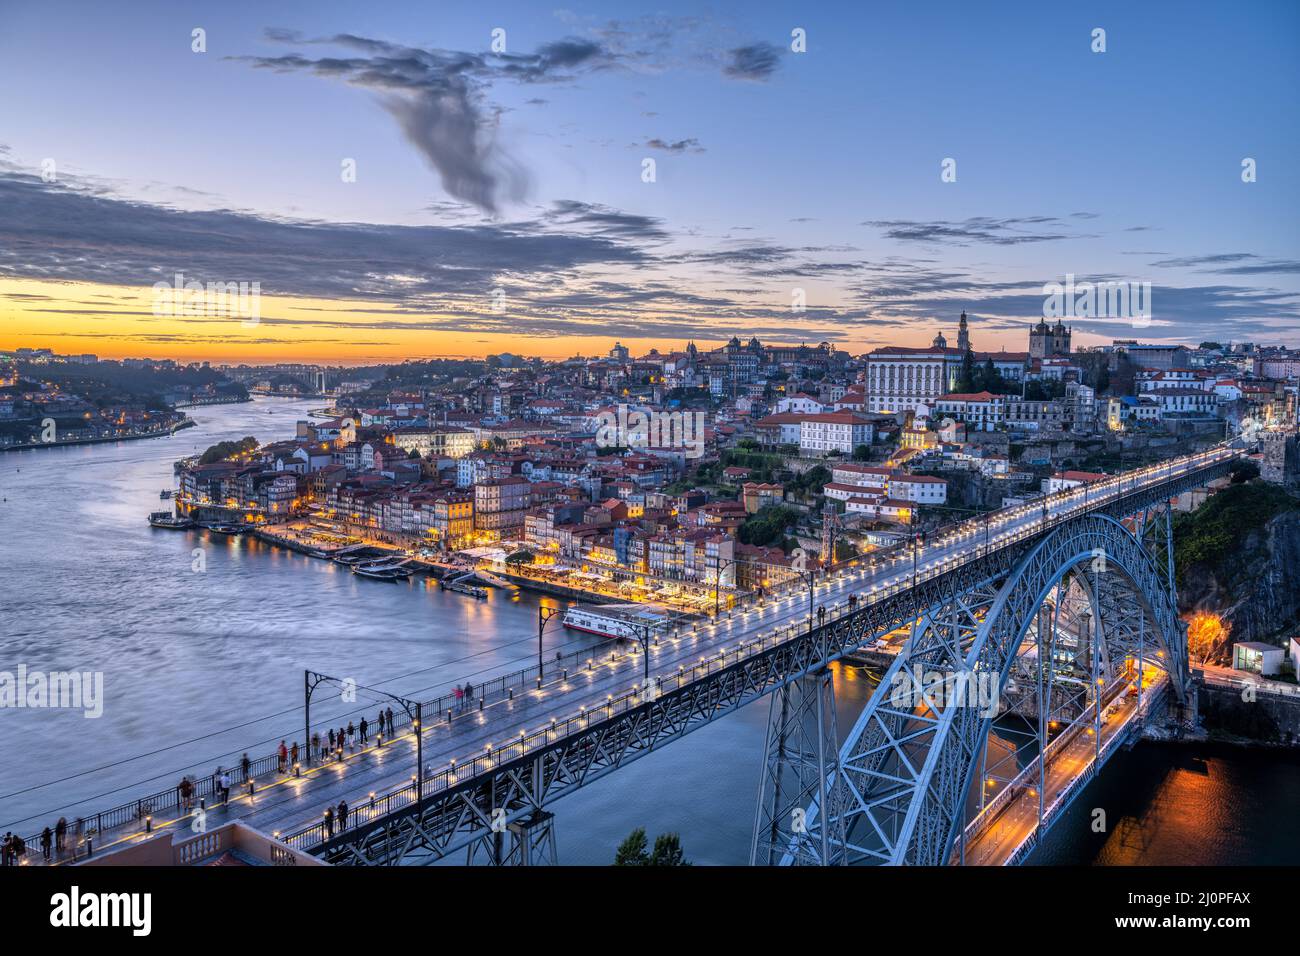 View of Porto with the famous iron bridge and the river Douro after sunset Stock Photo